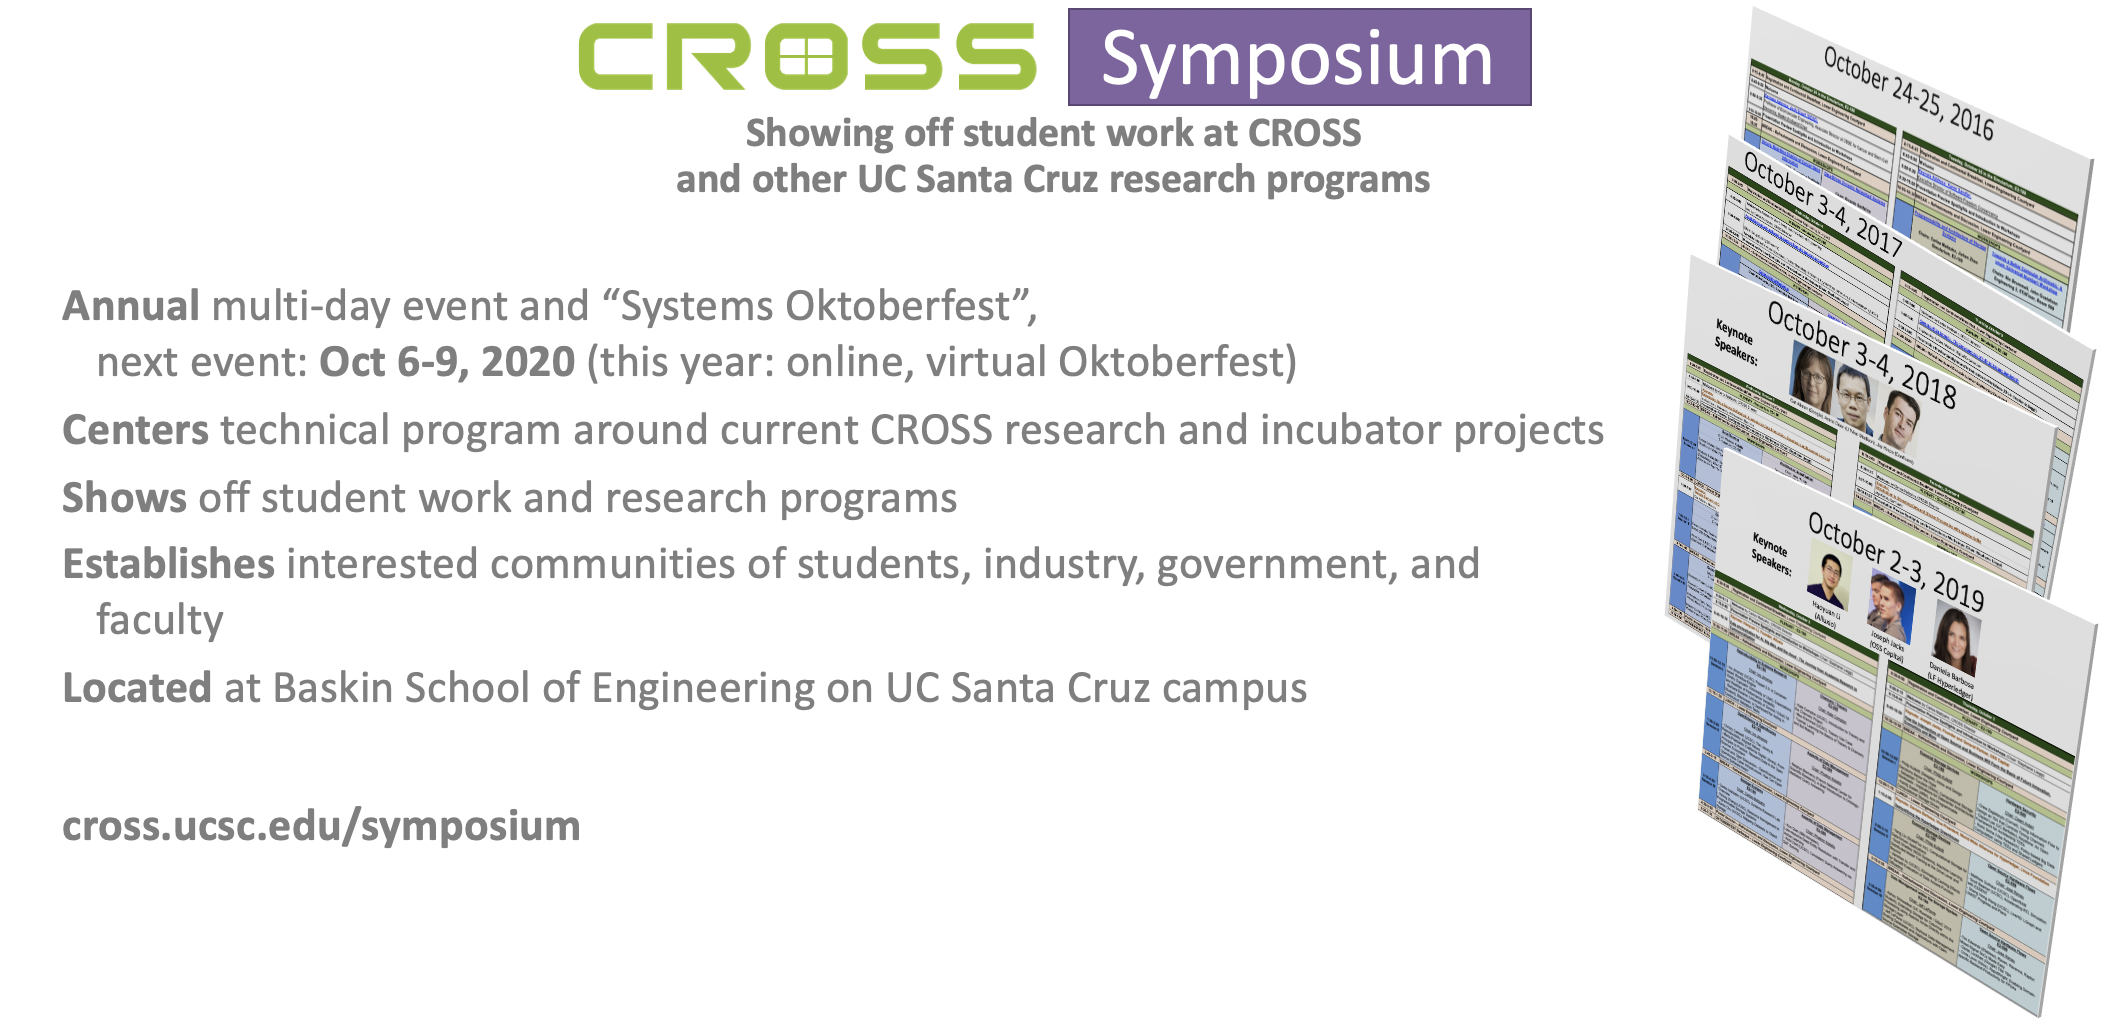 CROSS Symposium: Annual multi-day event and "Systems Oktoberfest", next event: Oct 6-9, 2020 (this year: online, virtual Oktoberfest); centers technical program around current CROSS research and incubator projects; shows off studdent work and research programs; establishes interested communities of students, industry, government, and faculty; located at Baskin School of Engineering on UC Santa Cruz campus; cross.ucsc.edu/symposium